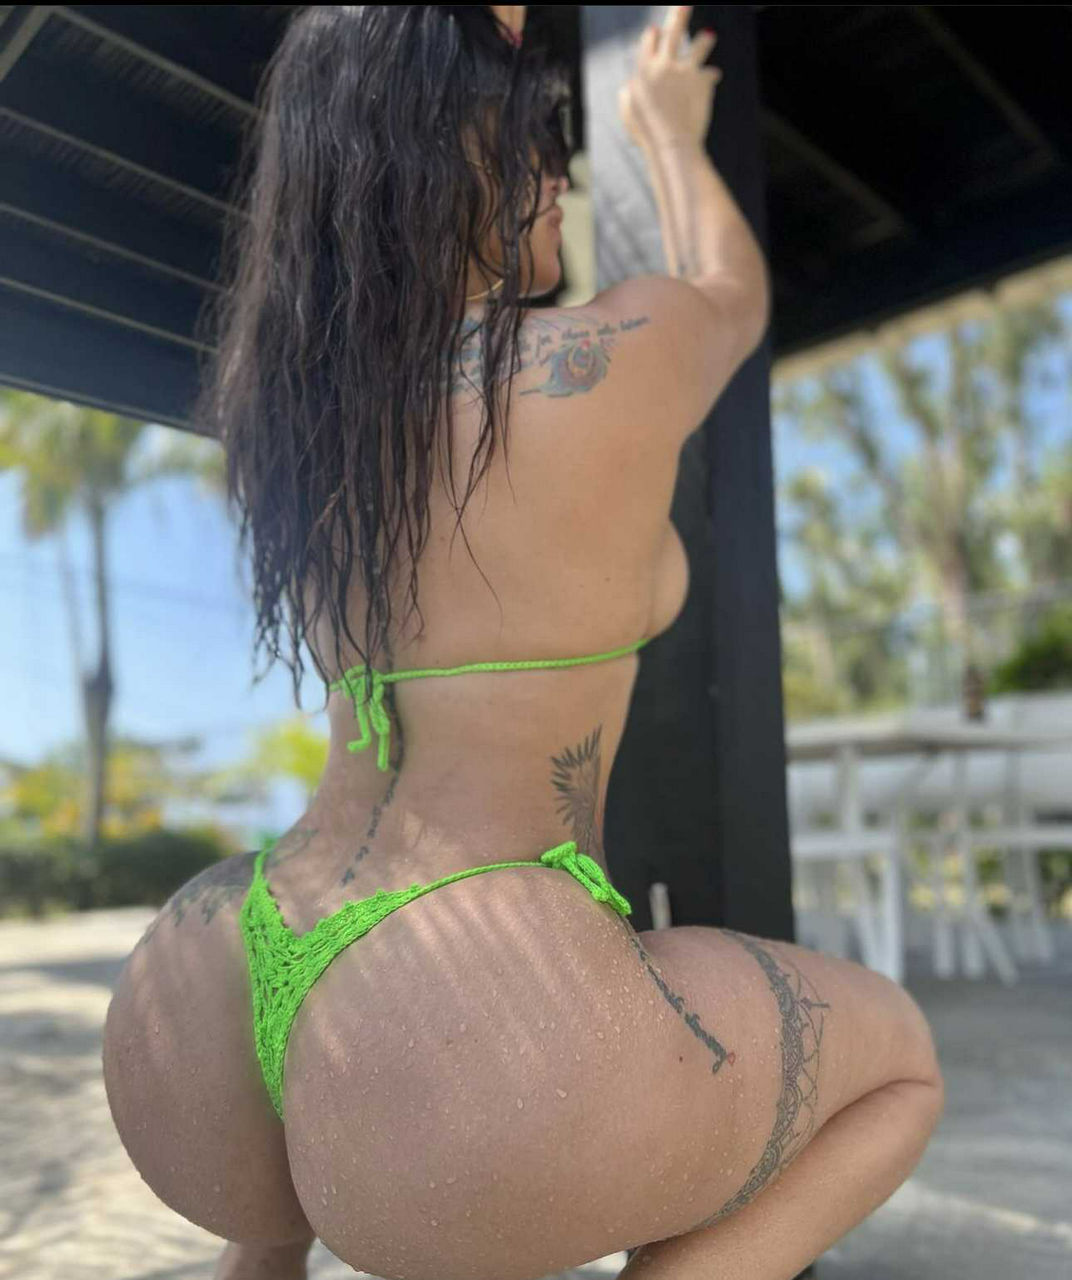 Latina very hot available / Call me now daddy 😍Full service Only cash  For Hour🤤